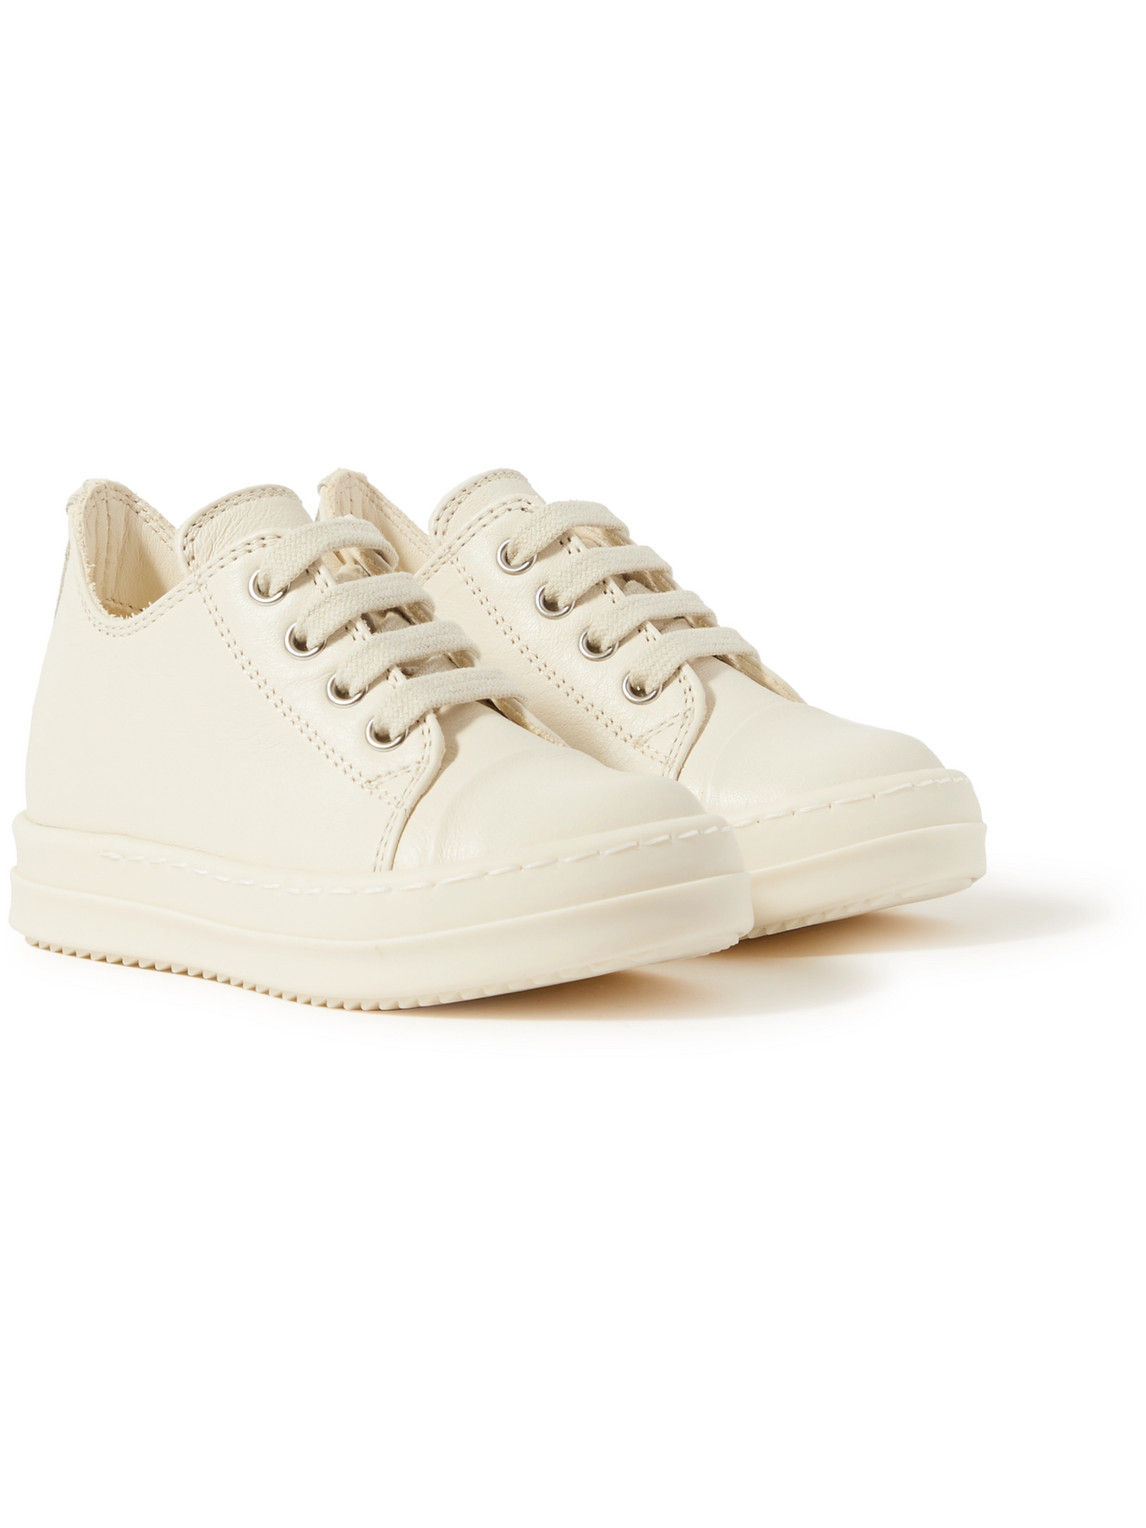 RICK OWENS BABY LEATHER SNEAKERS